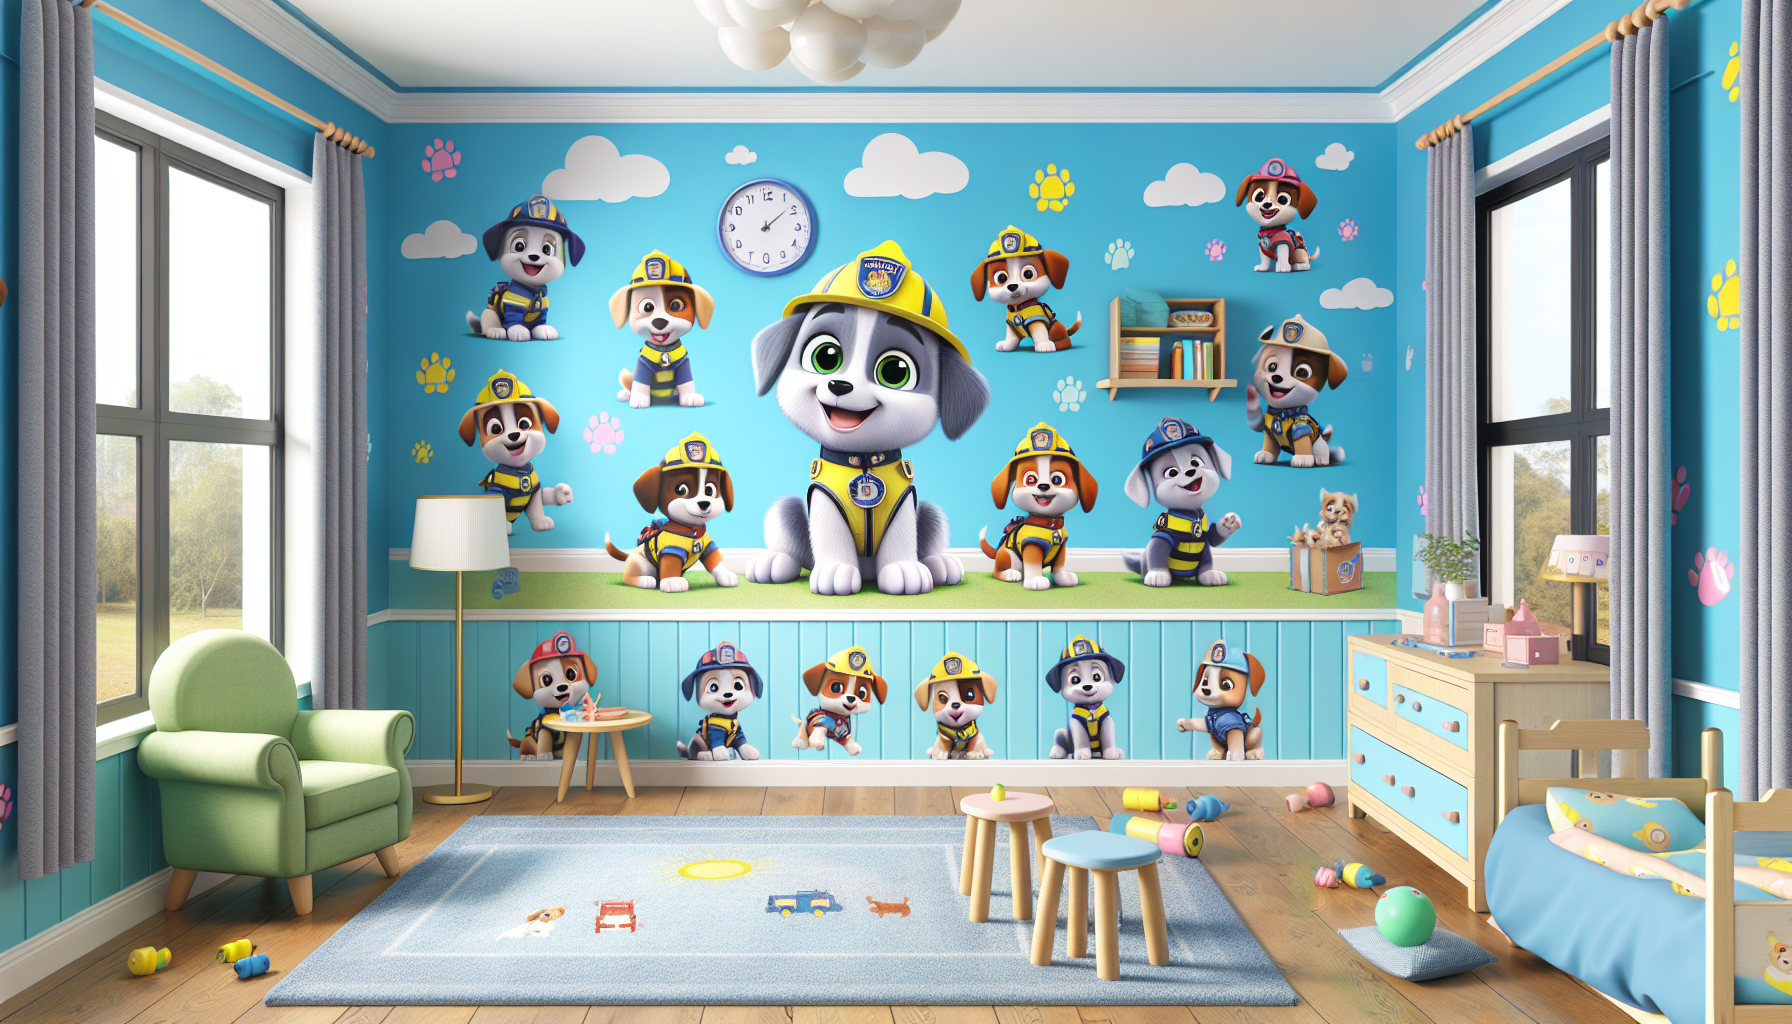 RoomMates Paw Patrol Wallpaper Review